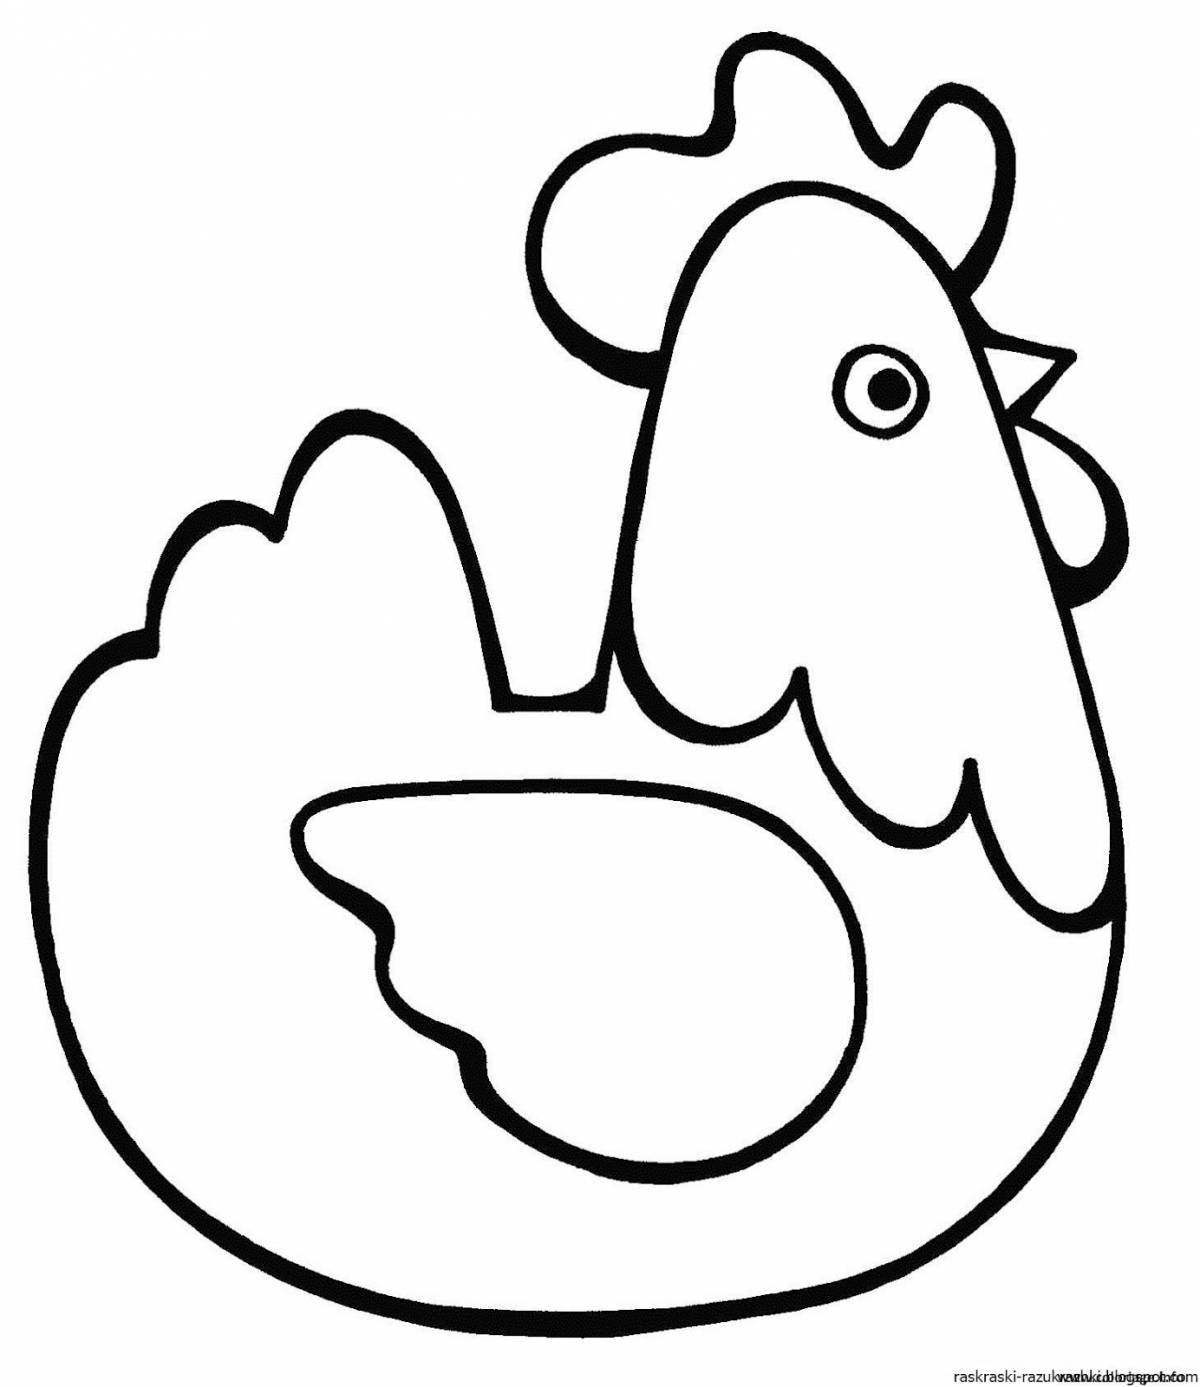 Playful chick coloring page for toddlers 2-3 years old